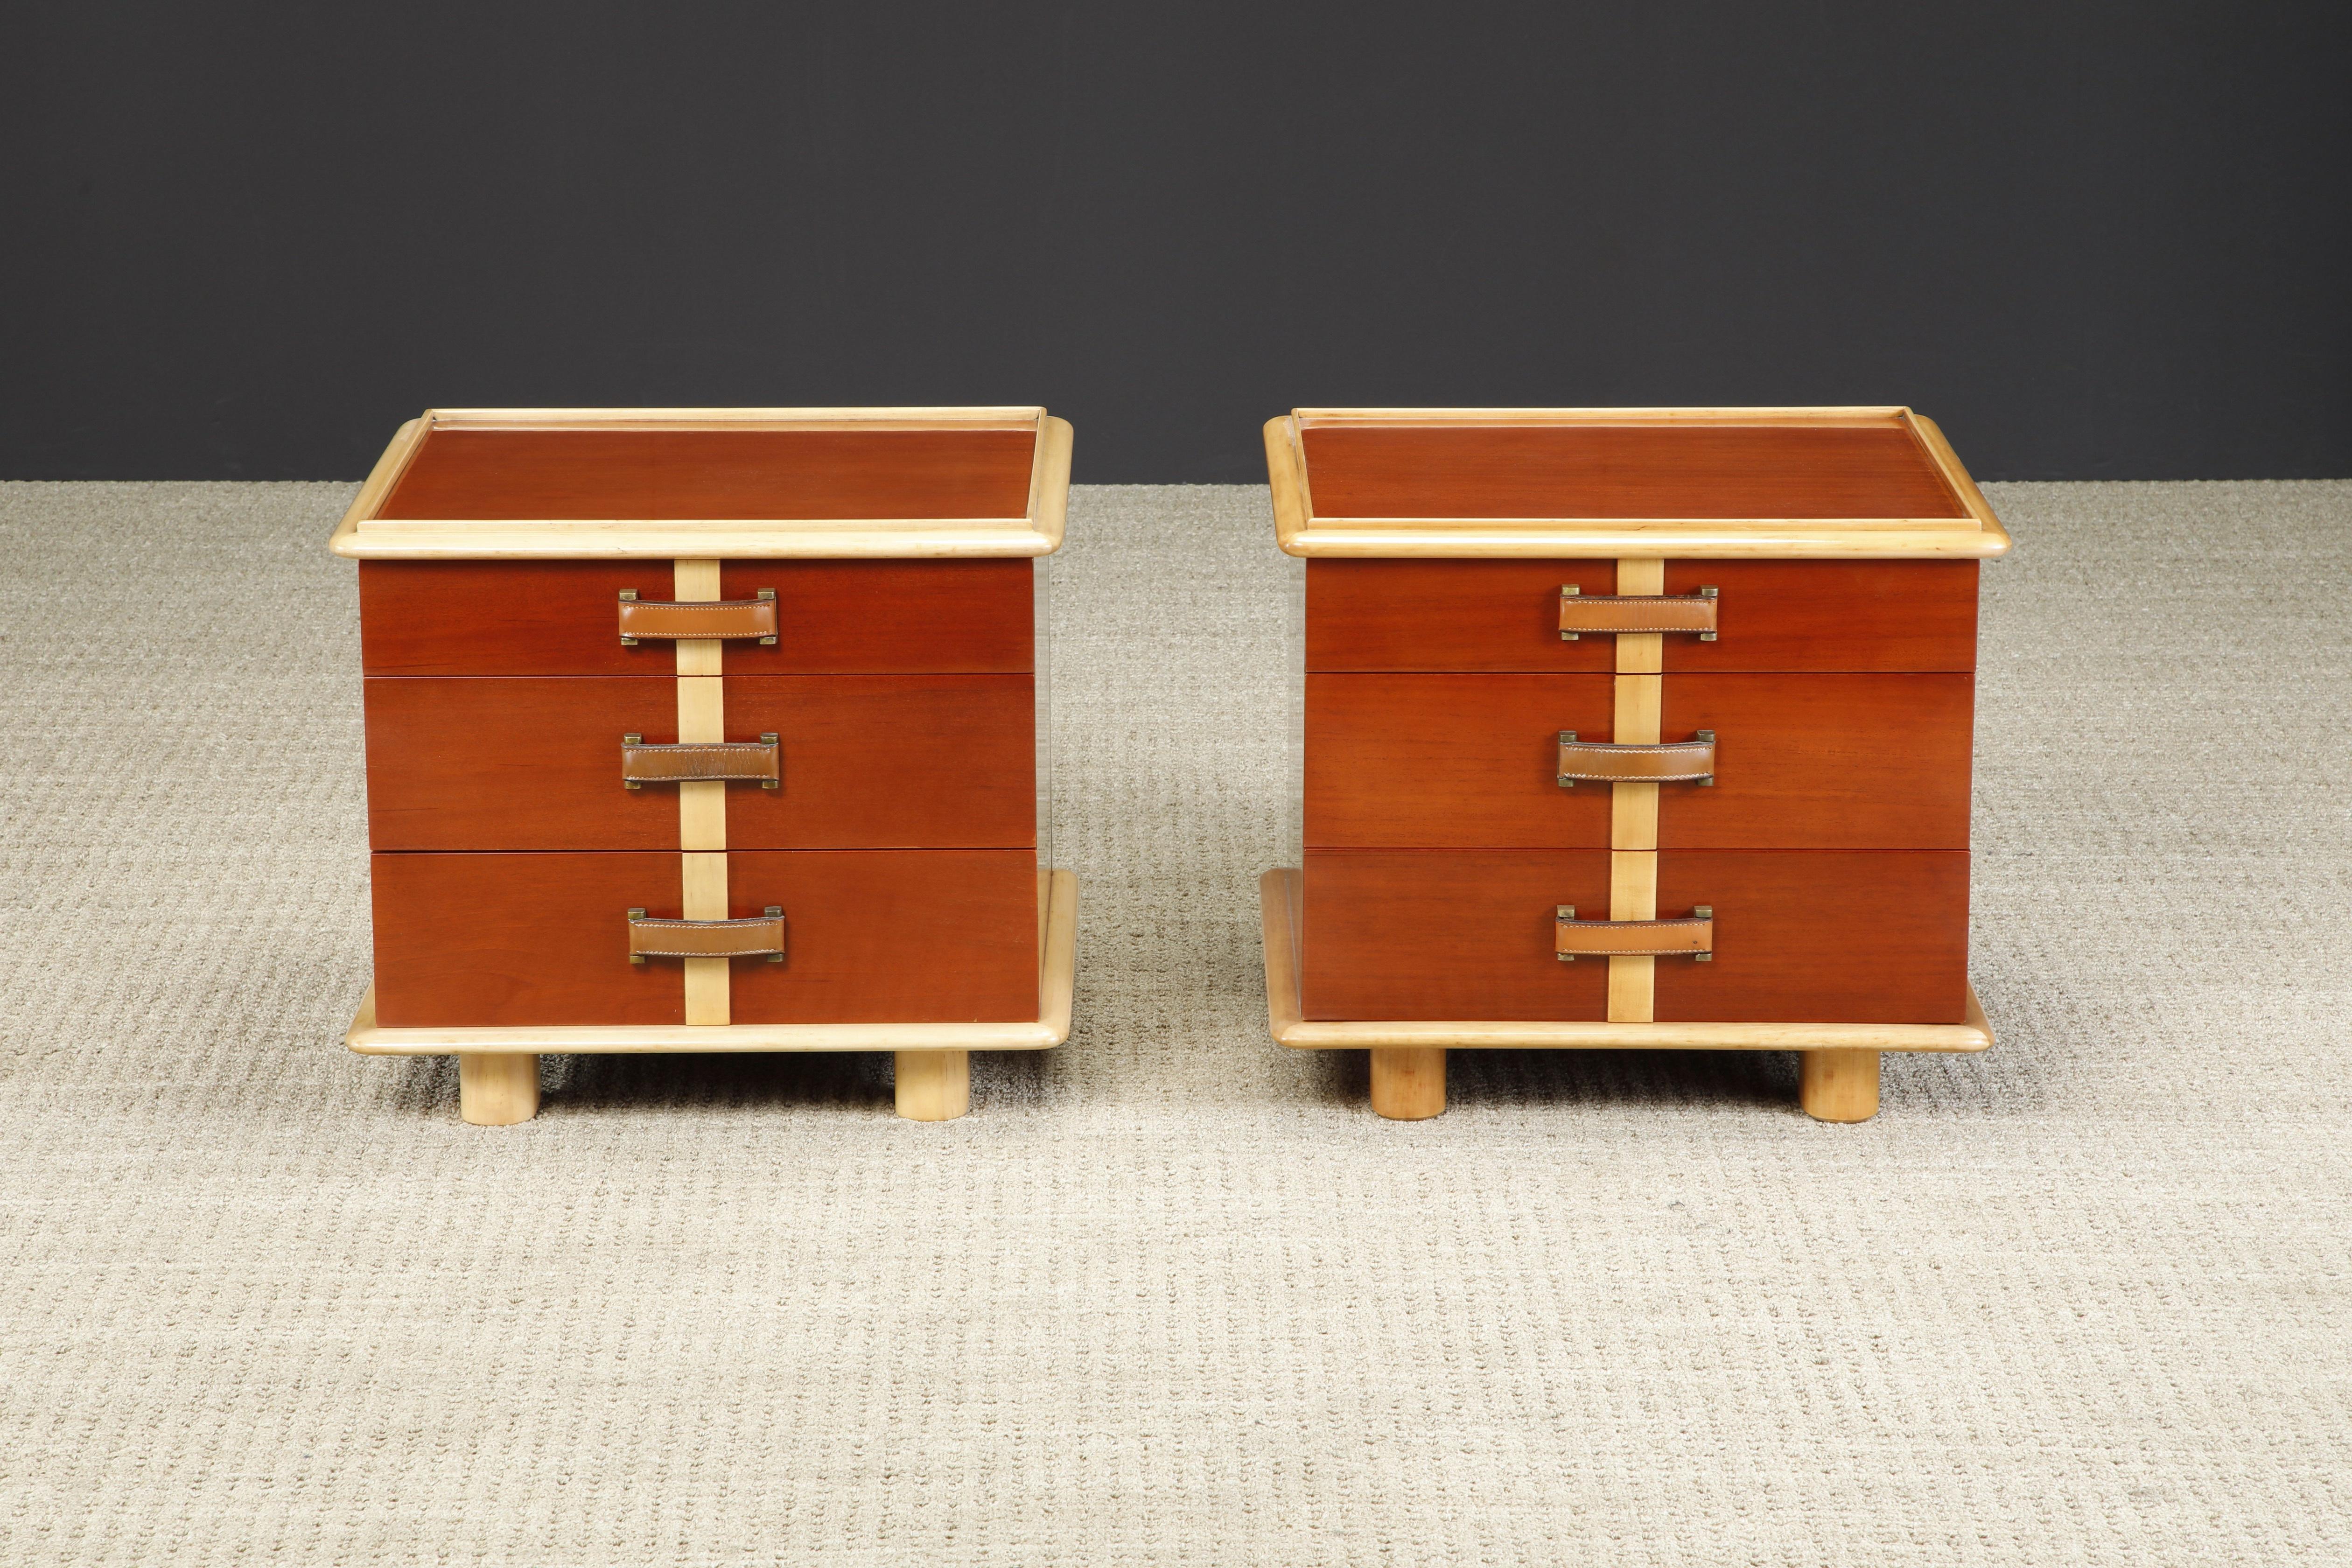 Mid-Century Modern 'Station Wagon' Nightstands by Paul Frankl for Johnson Furniture, c 1945, Signed